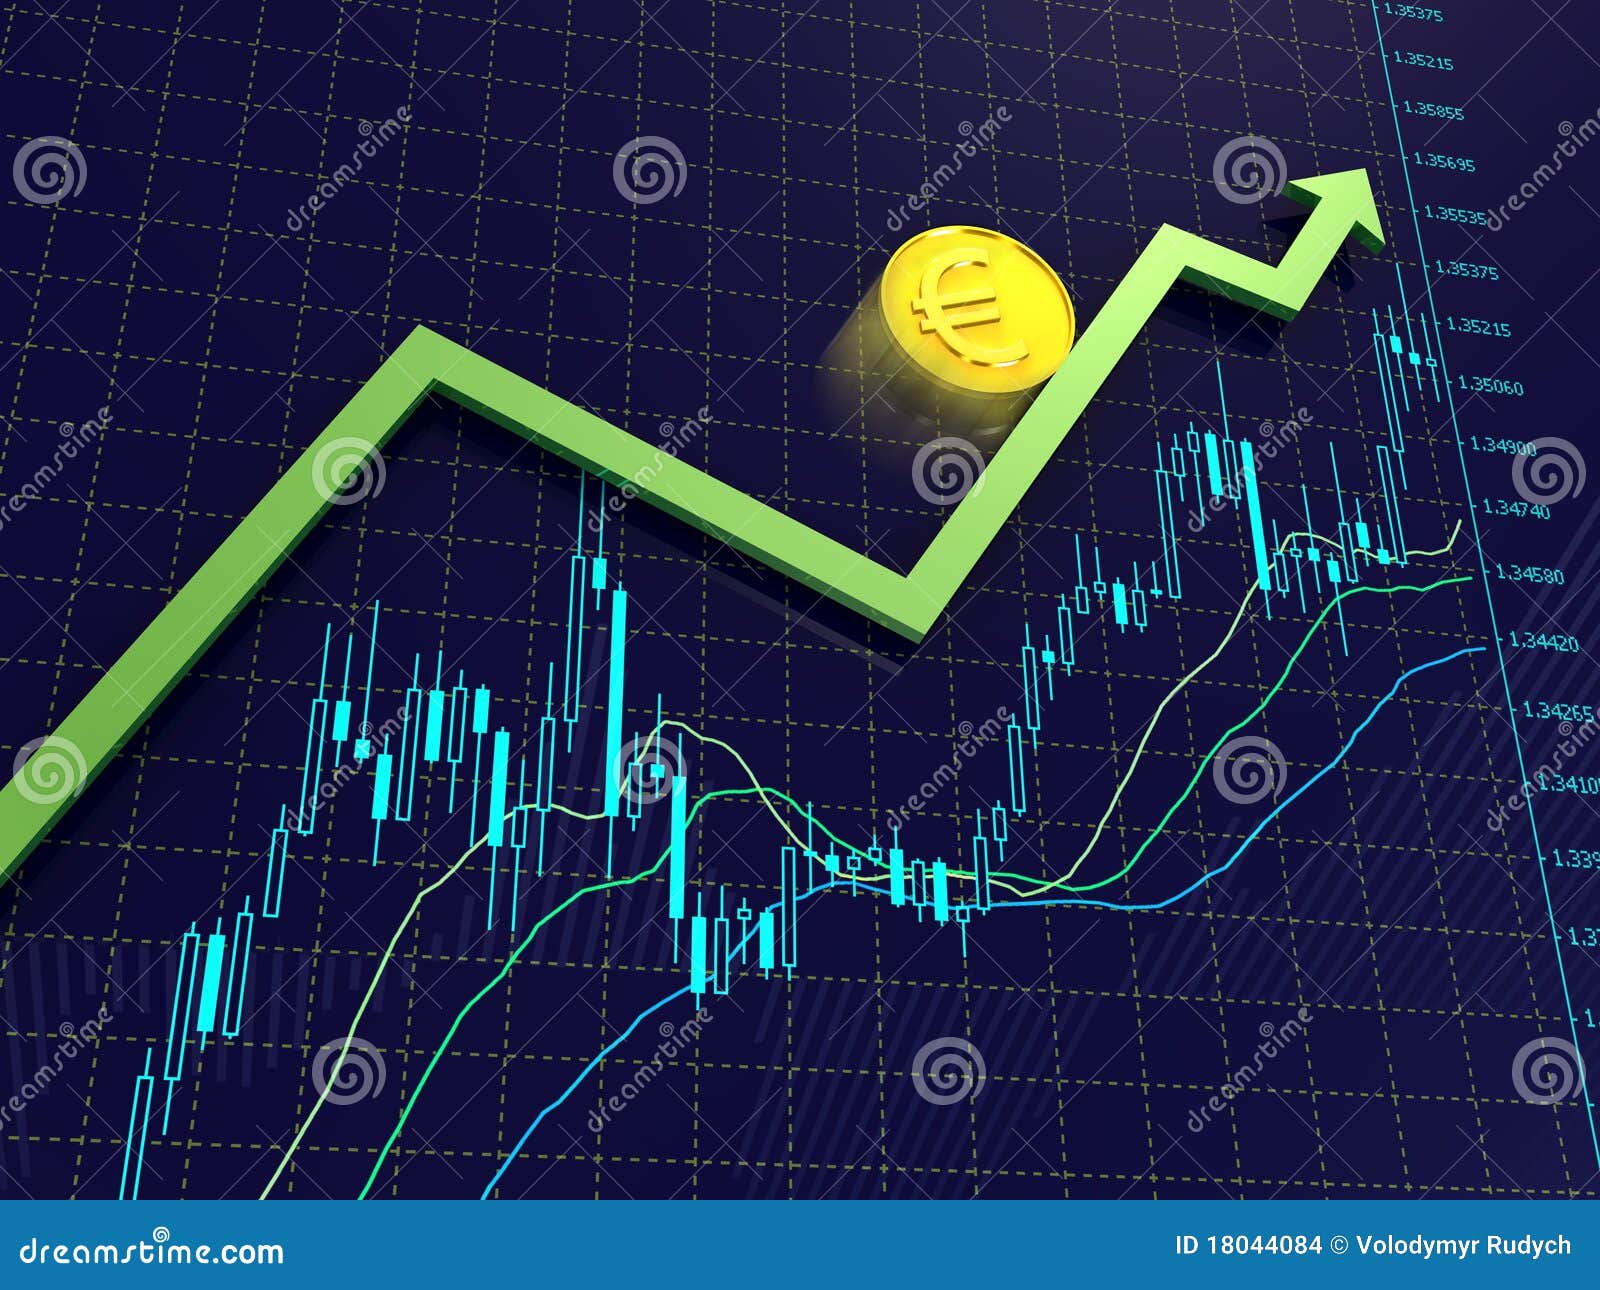 how to read forex charts beginners